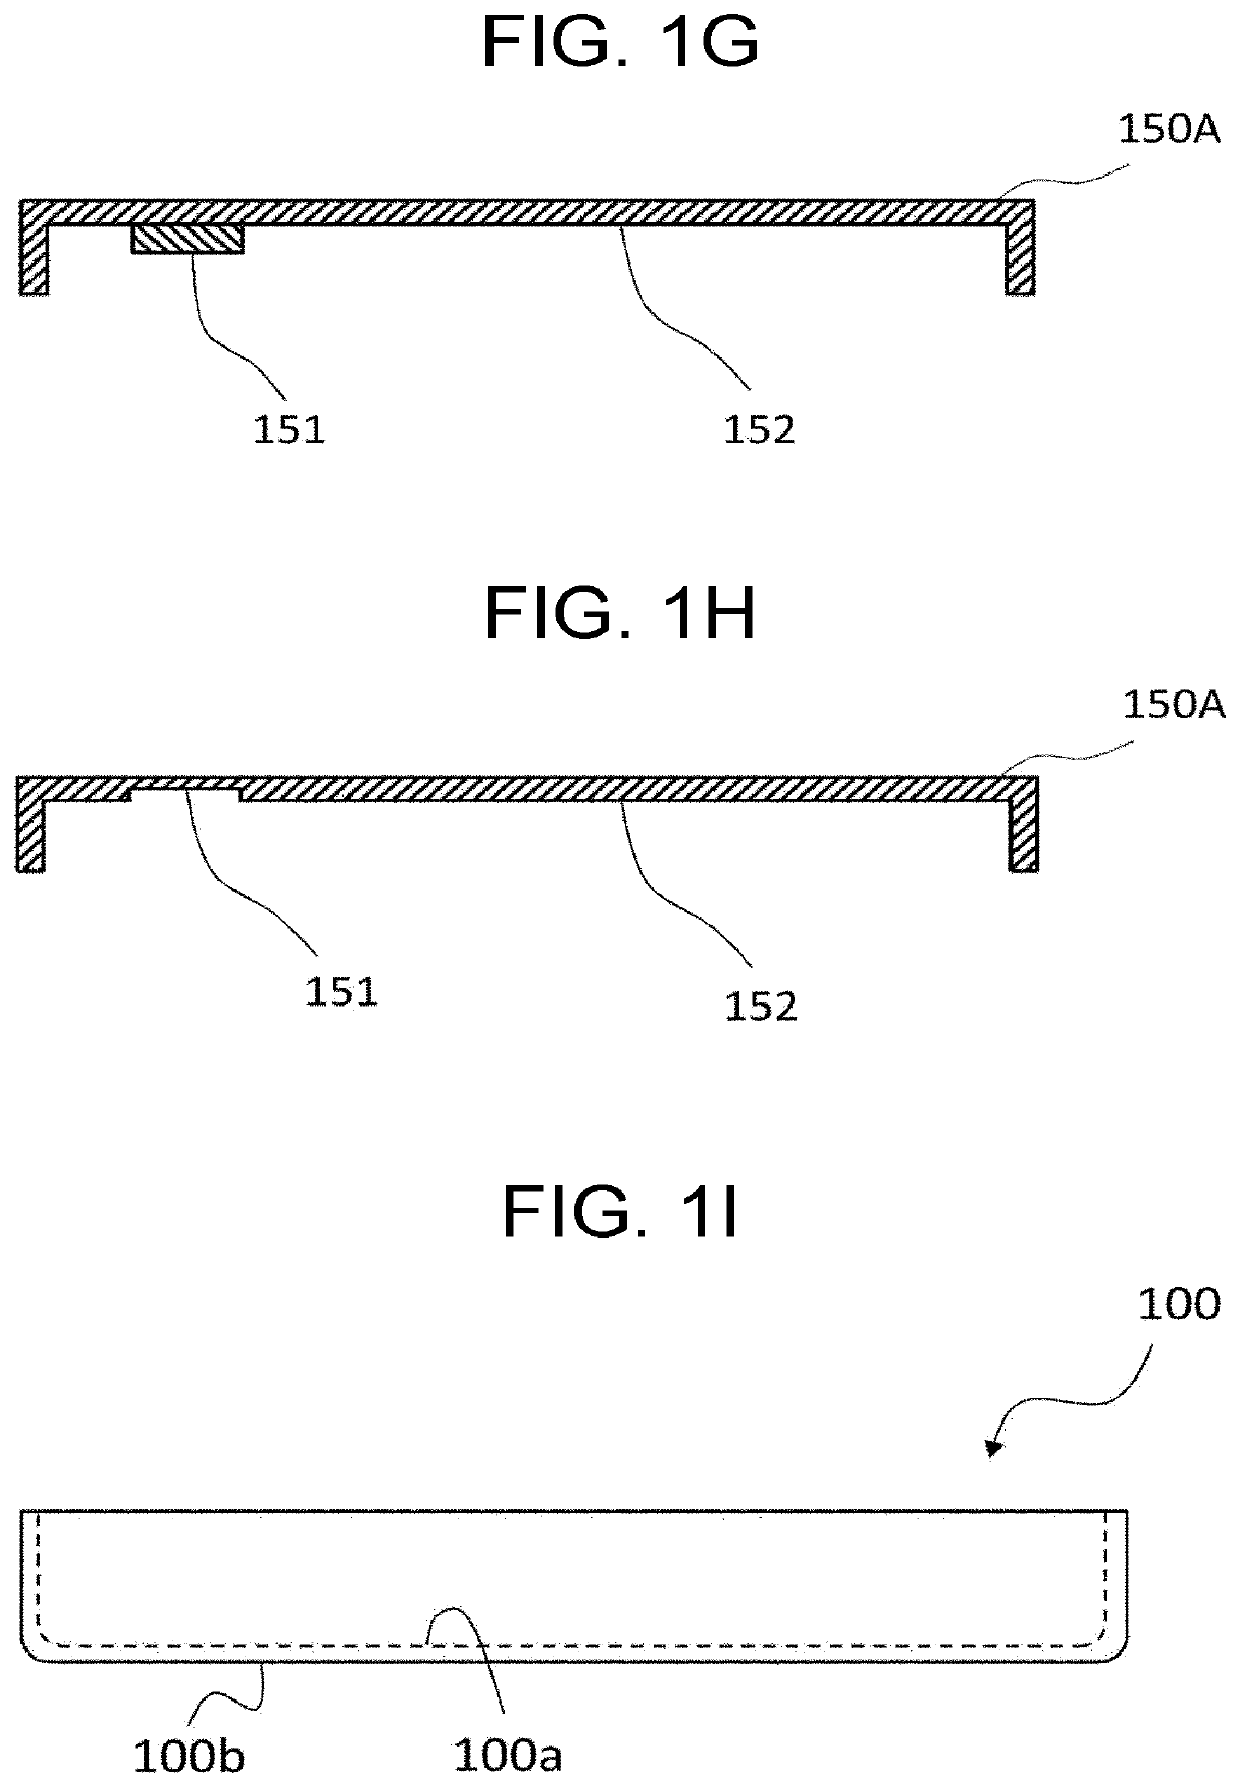 Method for evaluating taxic behavior in response to odor substance based on olfactory sense in nematodes, and dish and behavior evaluation system used in evaluation method